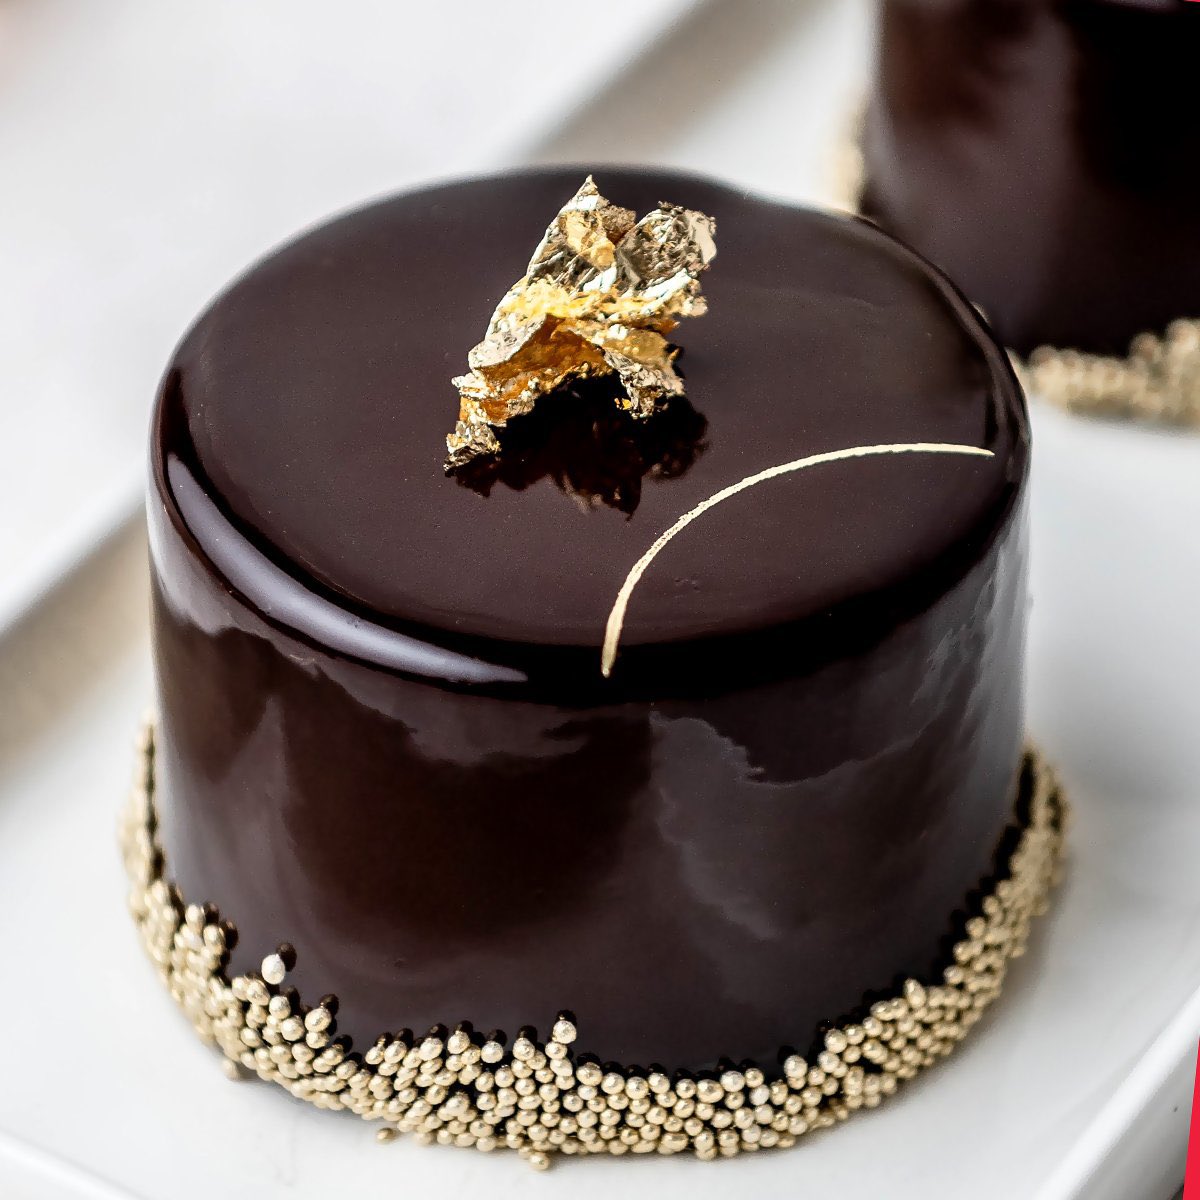 Too pretty to eat! #foodie #chocolatedessert